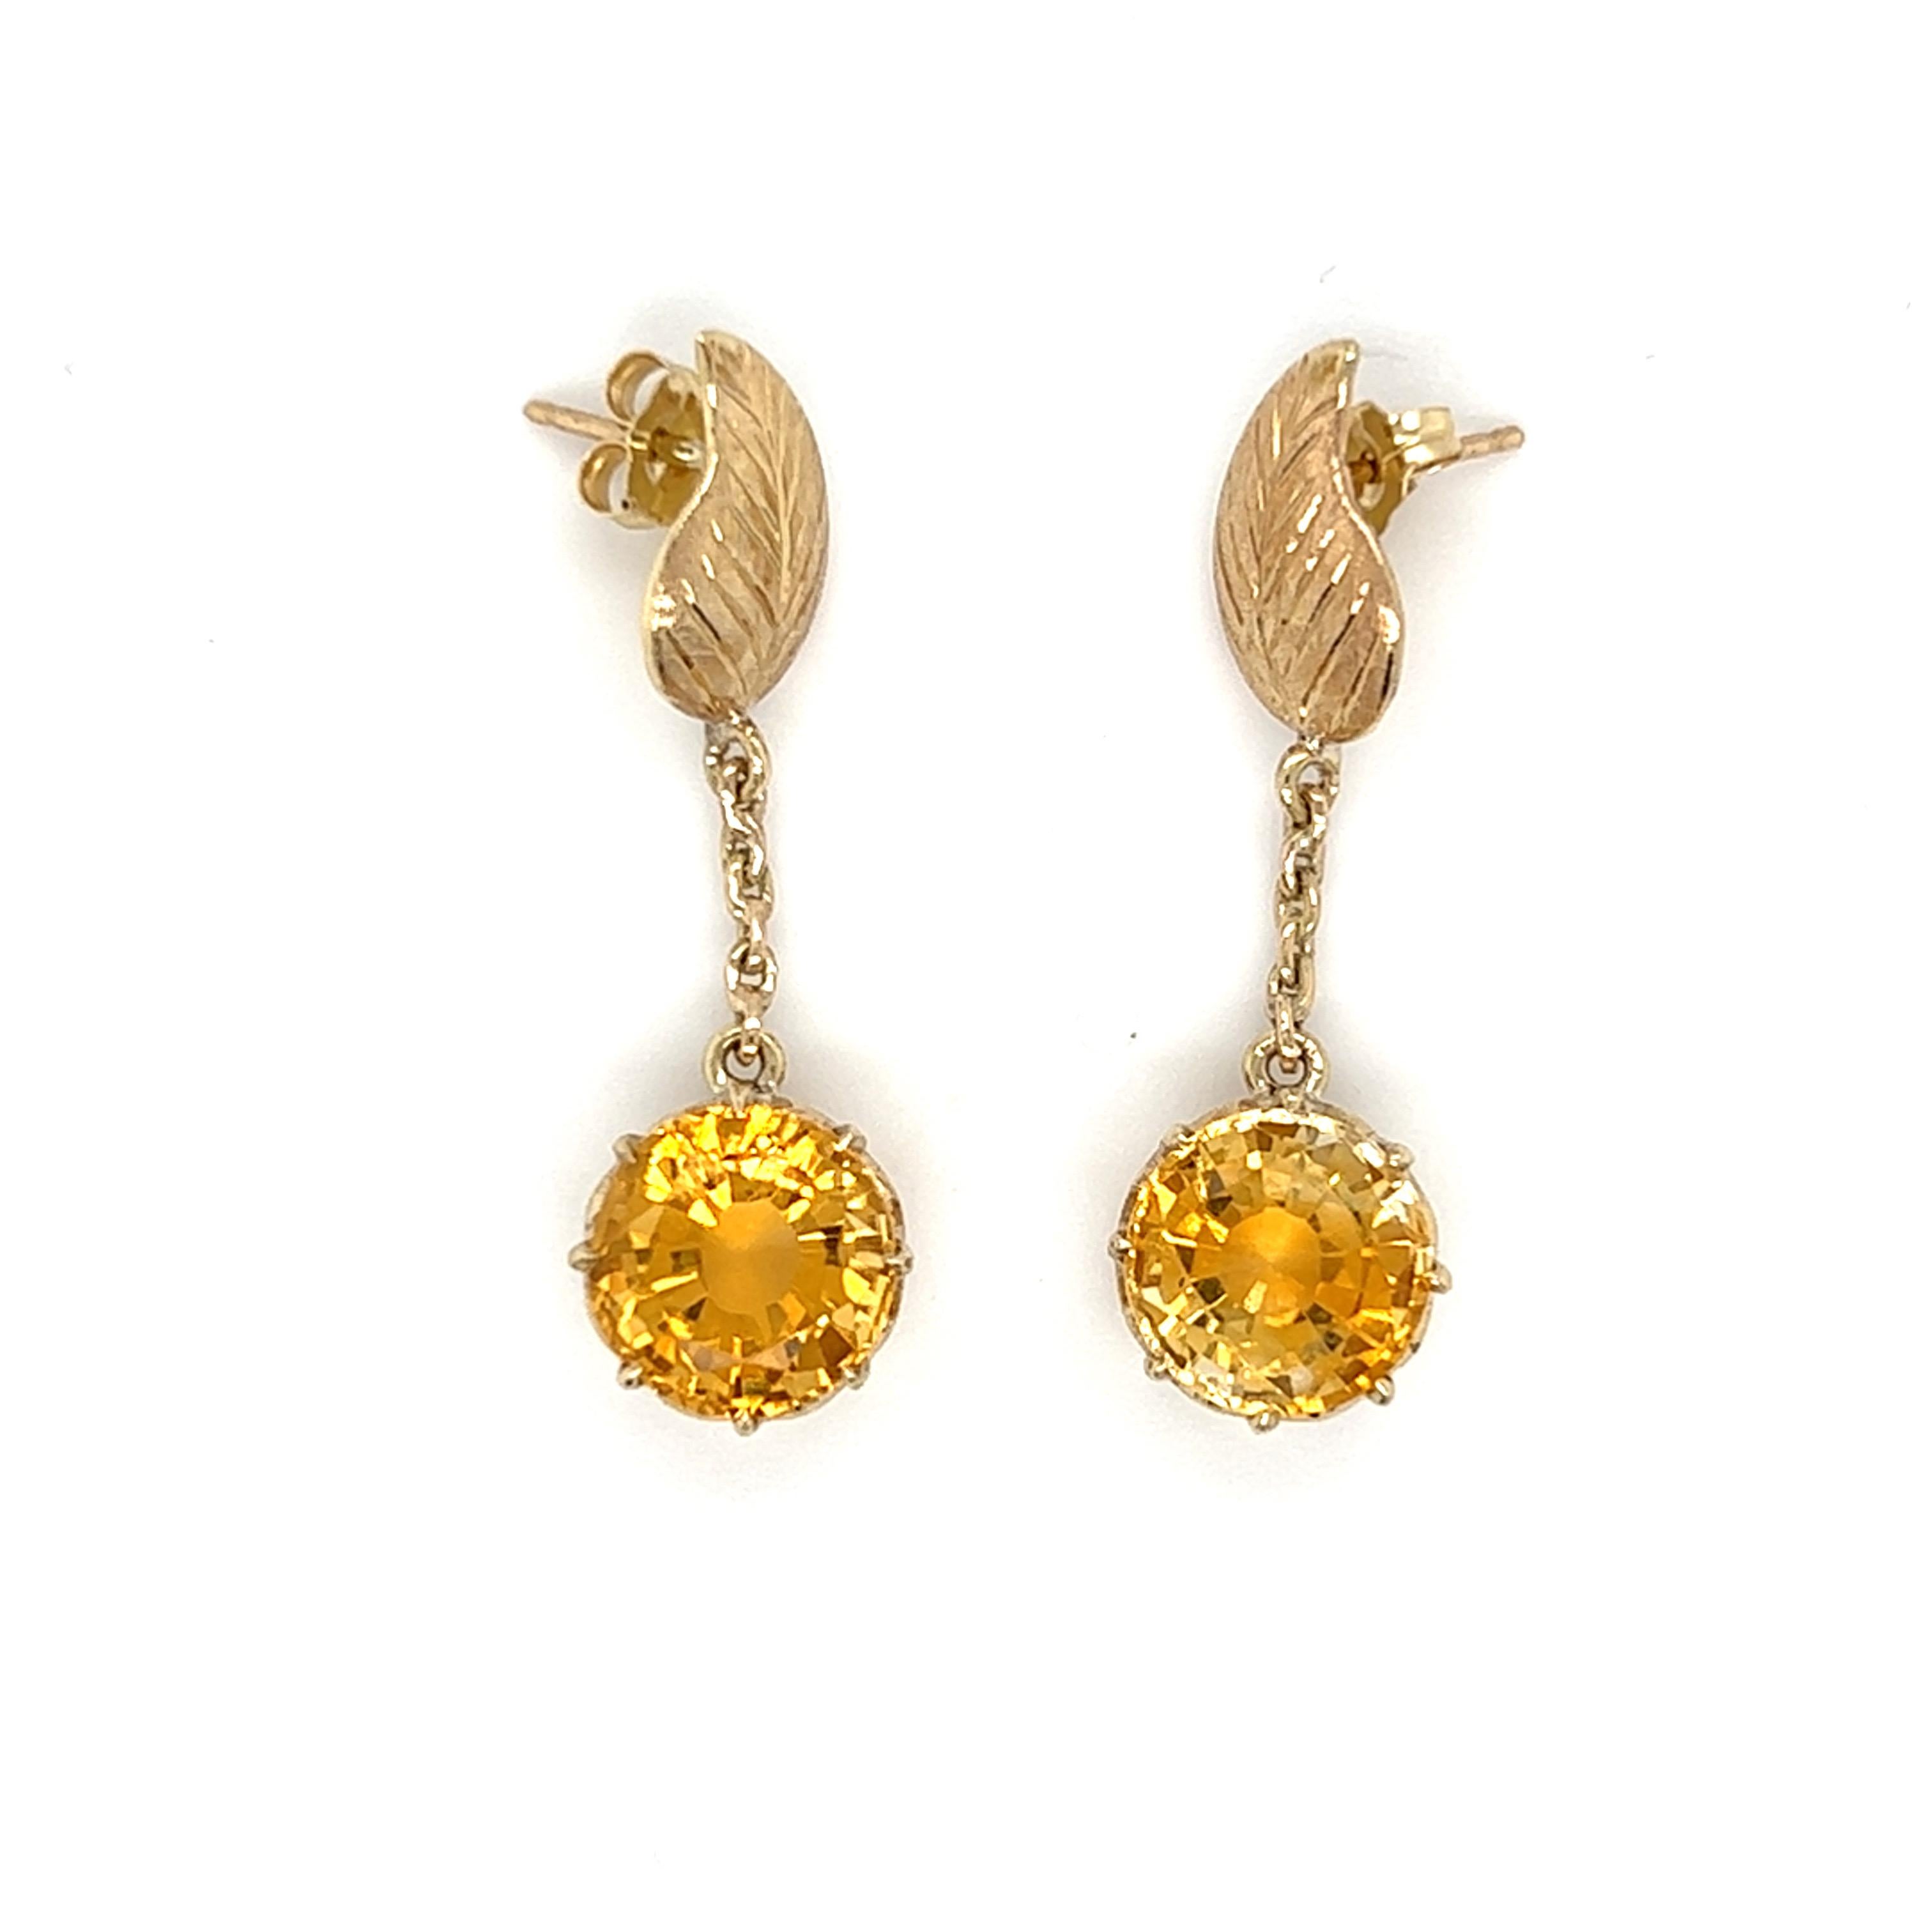 One pair of 14 karat yellow gold earrings featuring two (2) 9.3mm round faceted citrines that weigh approximately 4.0 carats total weight set in a crown style 8-prong baskets dangling from a 14 karat yellow gold diamond cut finish leaf post.  The